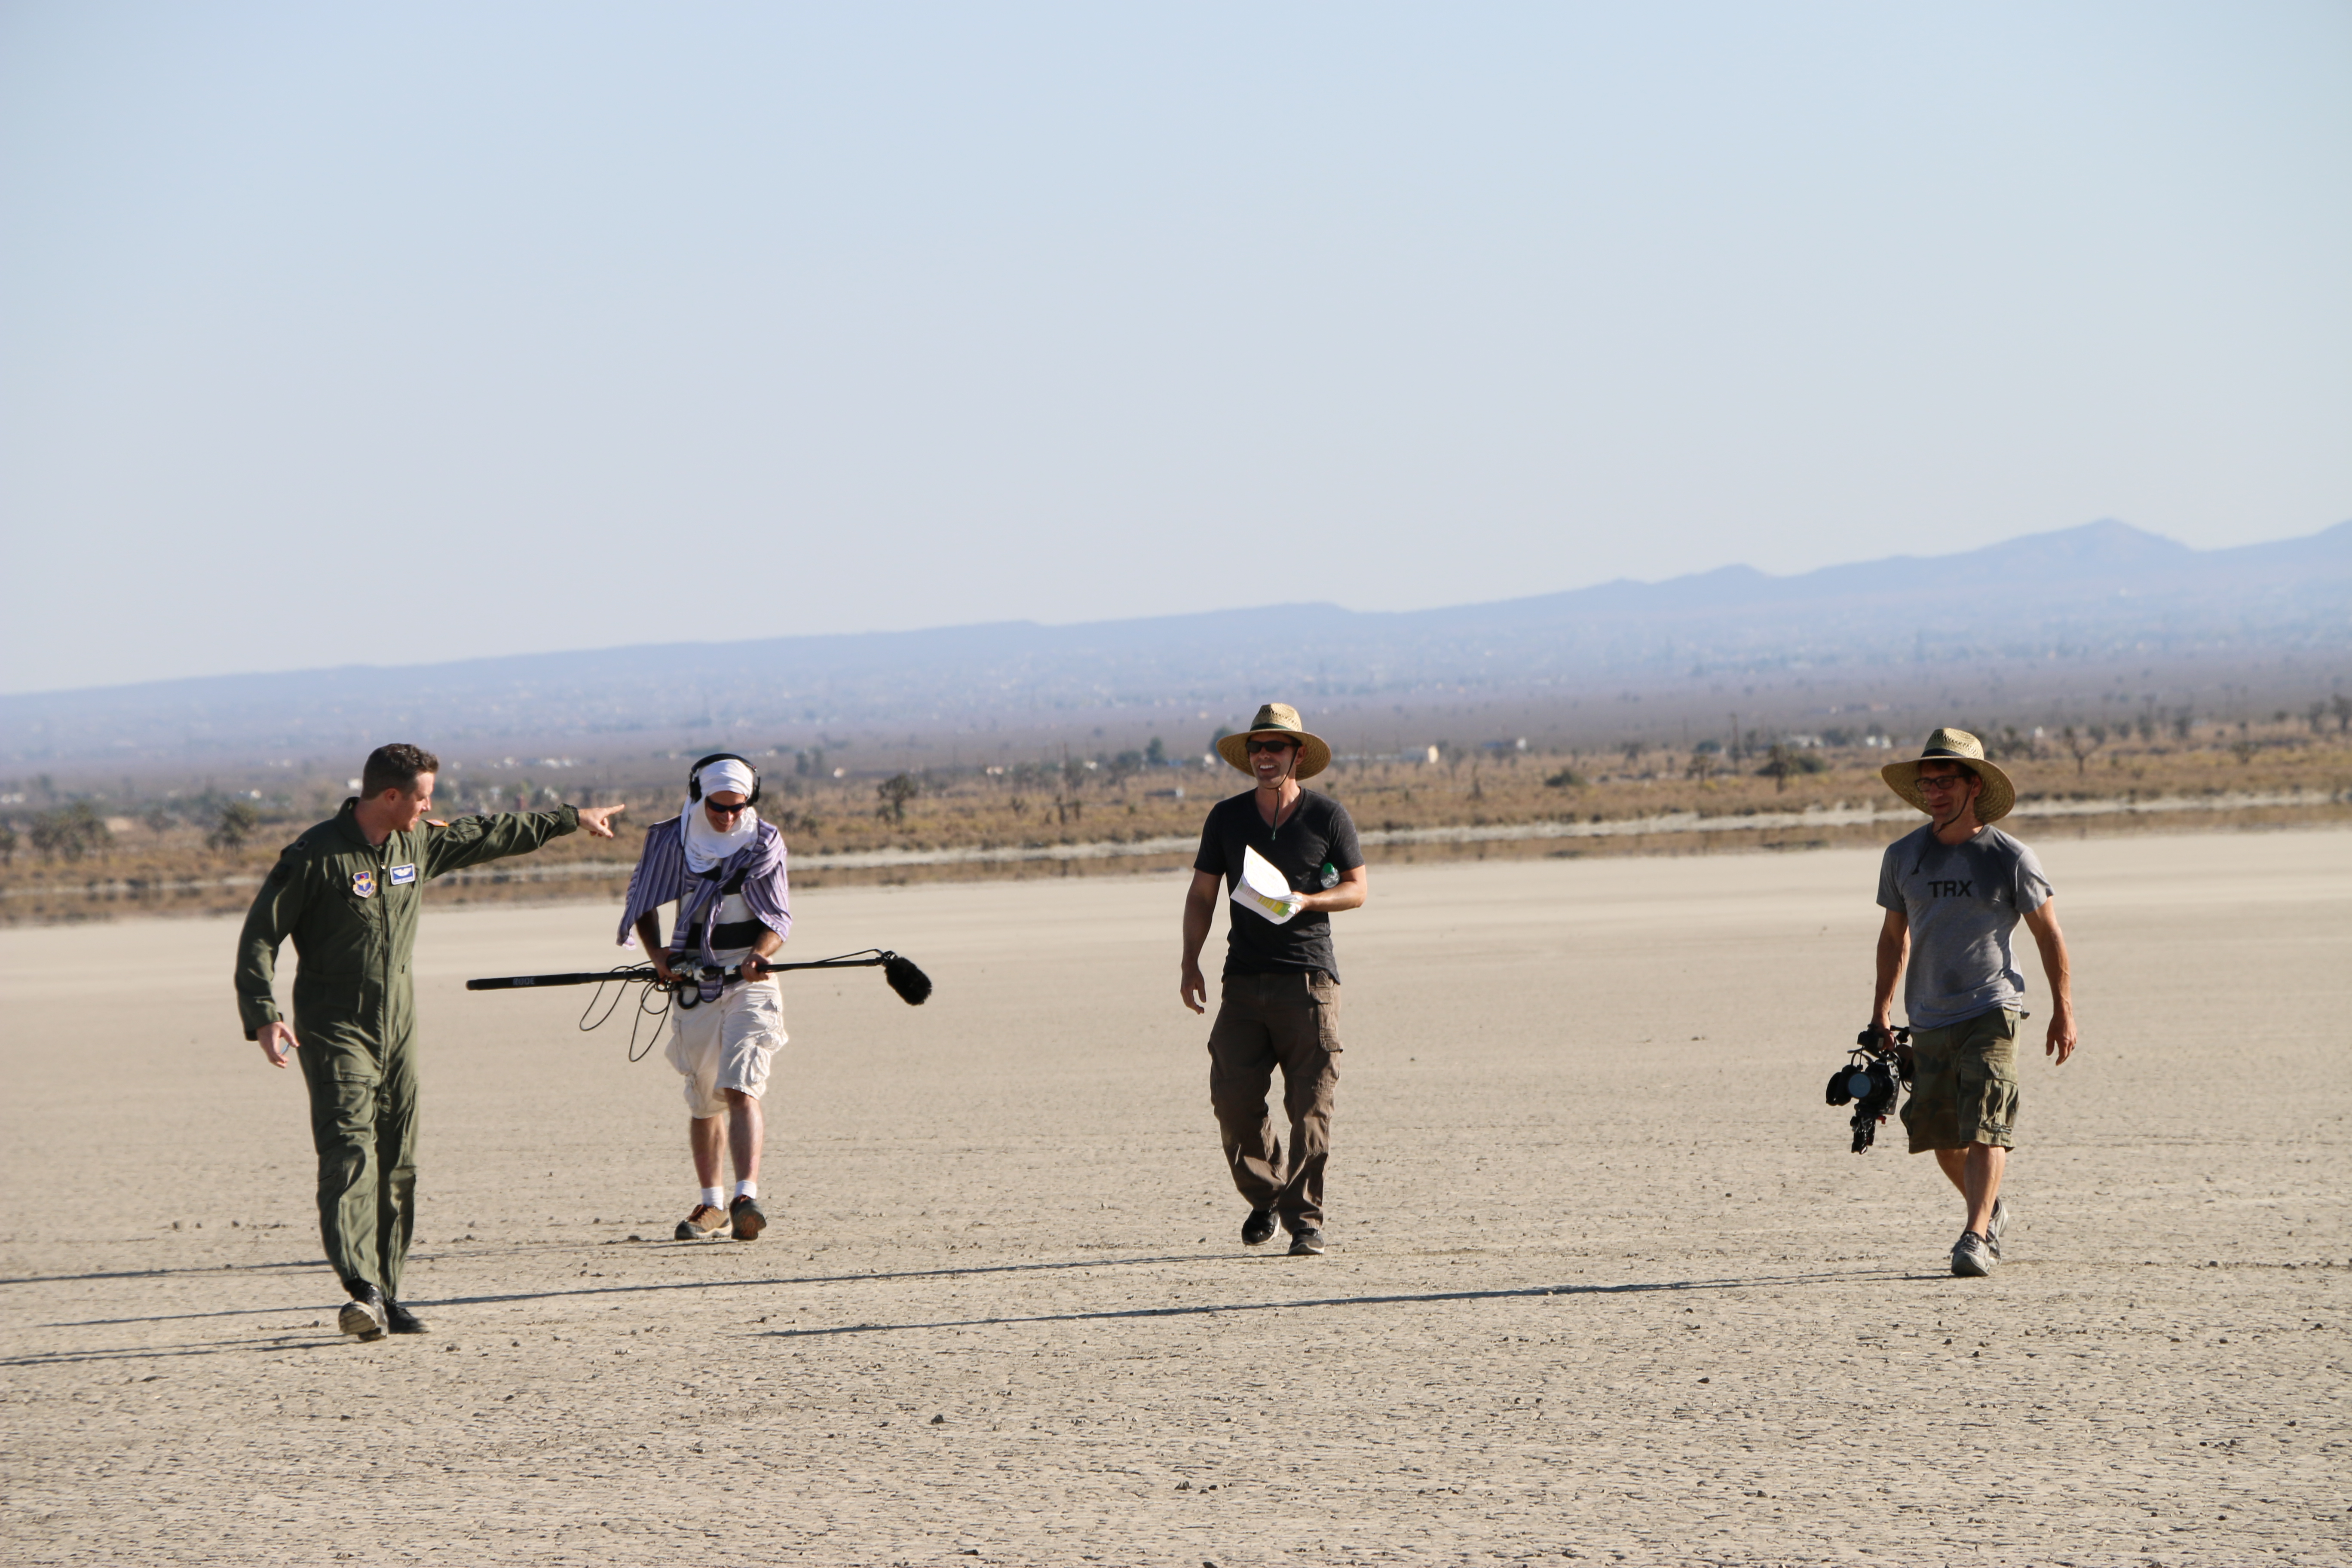 On location at El Mirage for director/producer Richard Handley's 